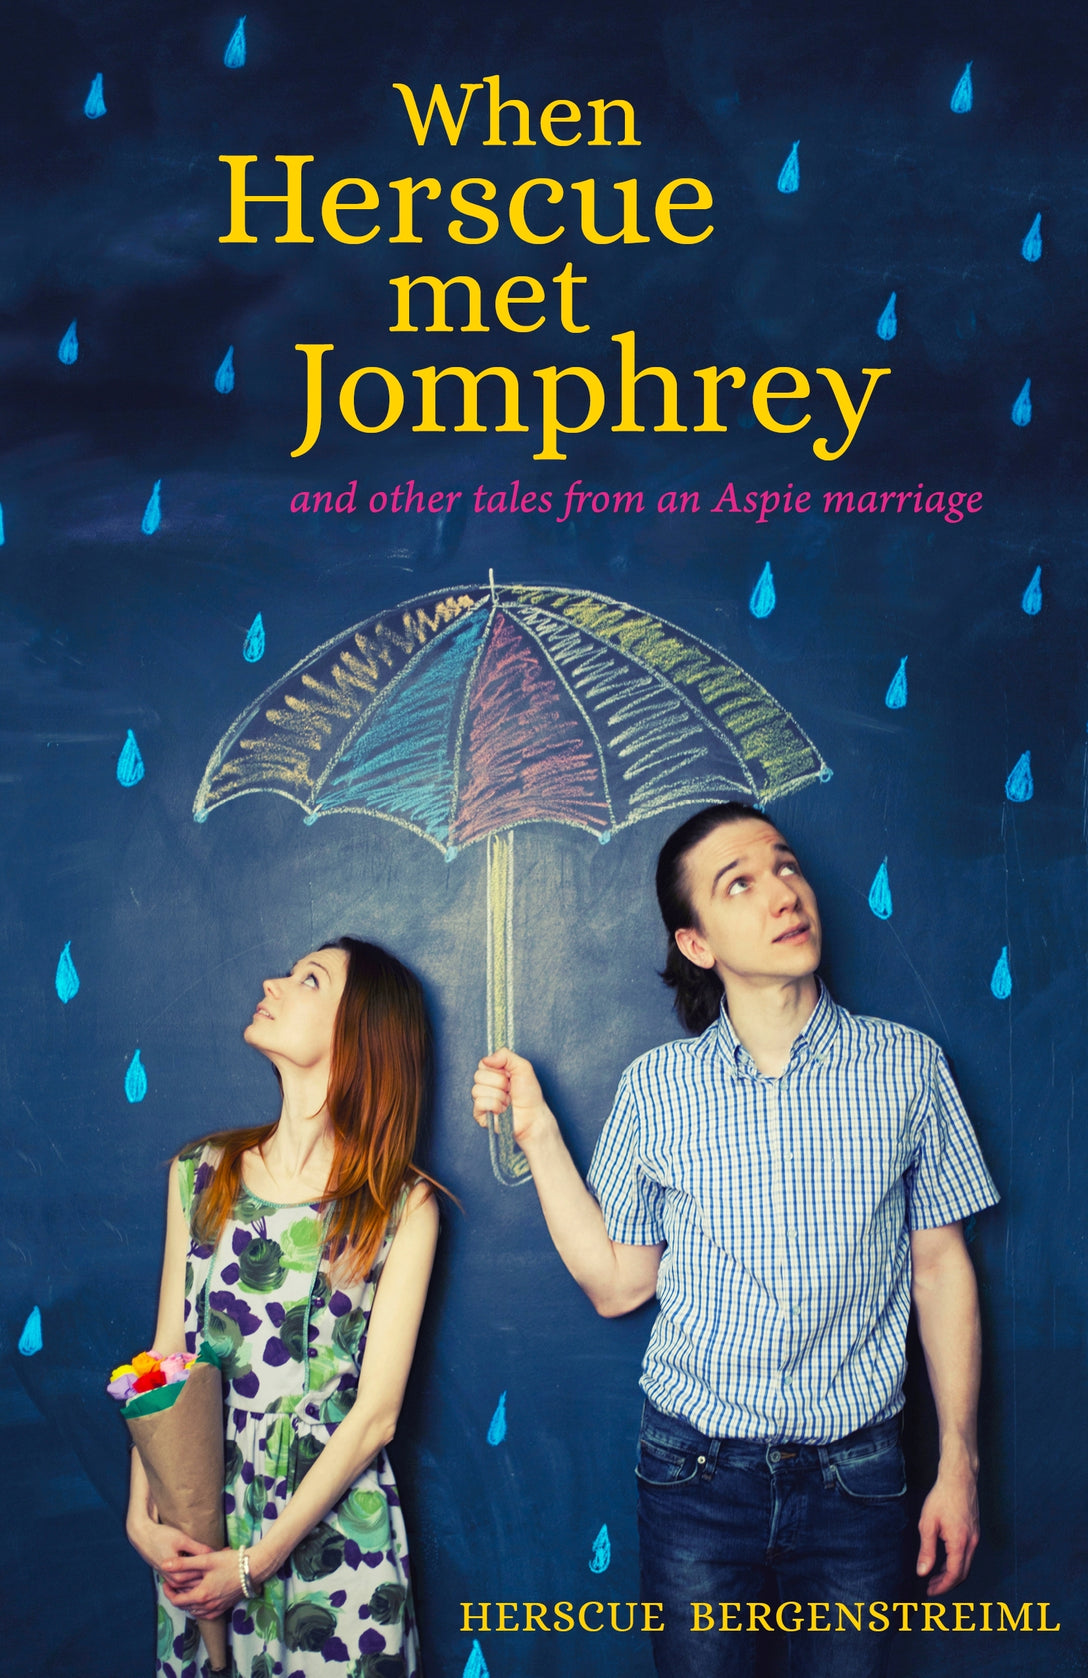 When Herscue Met Jomphrey and Other Tales from an Aspie Marriage by Herscue Bergenstreiml